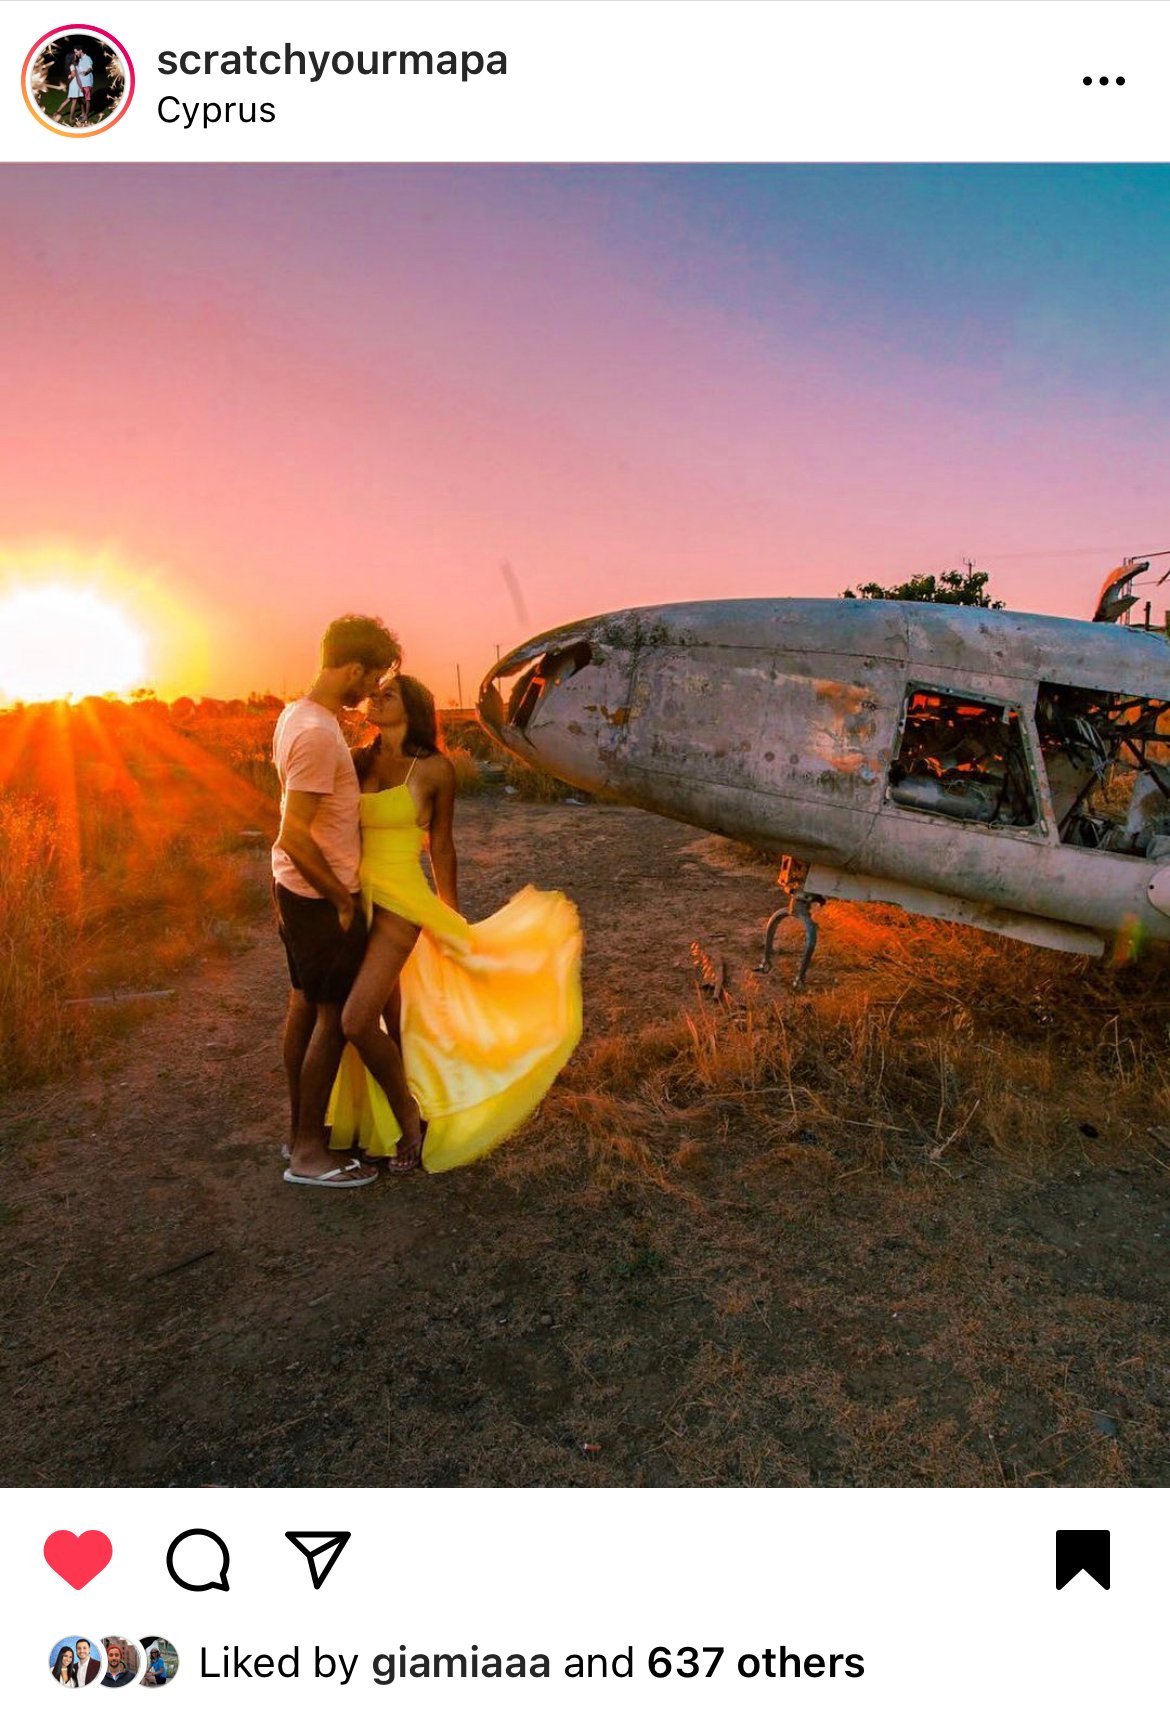 abandoned plane- Instagrammable sots in Cyprus